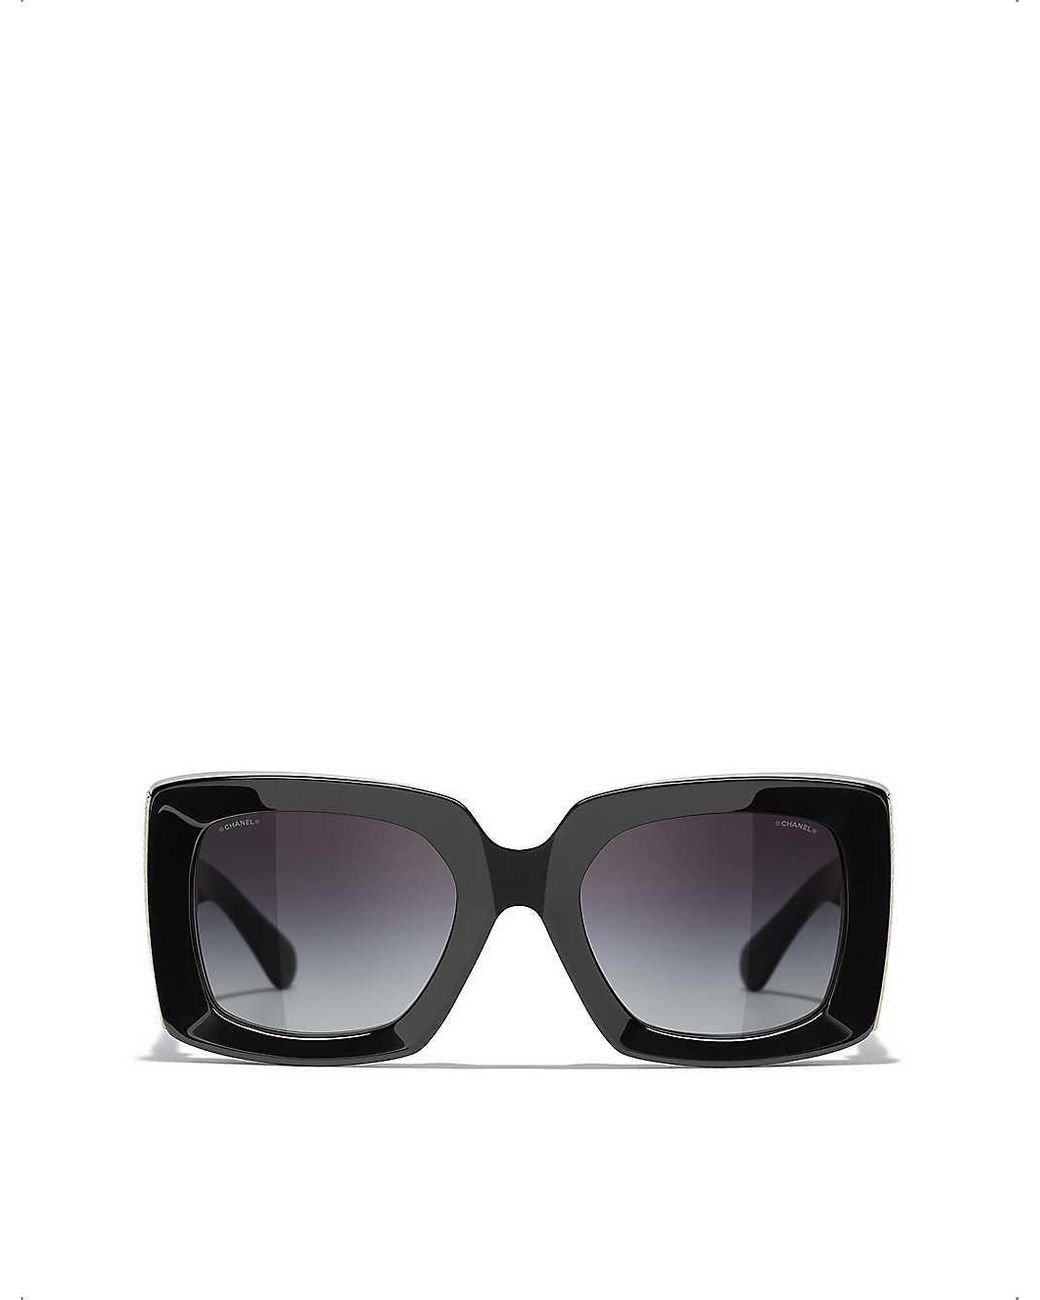 Chanel Rectangle Sunglasses in Black | Lyst